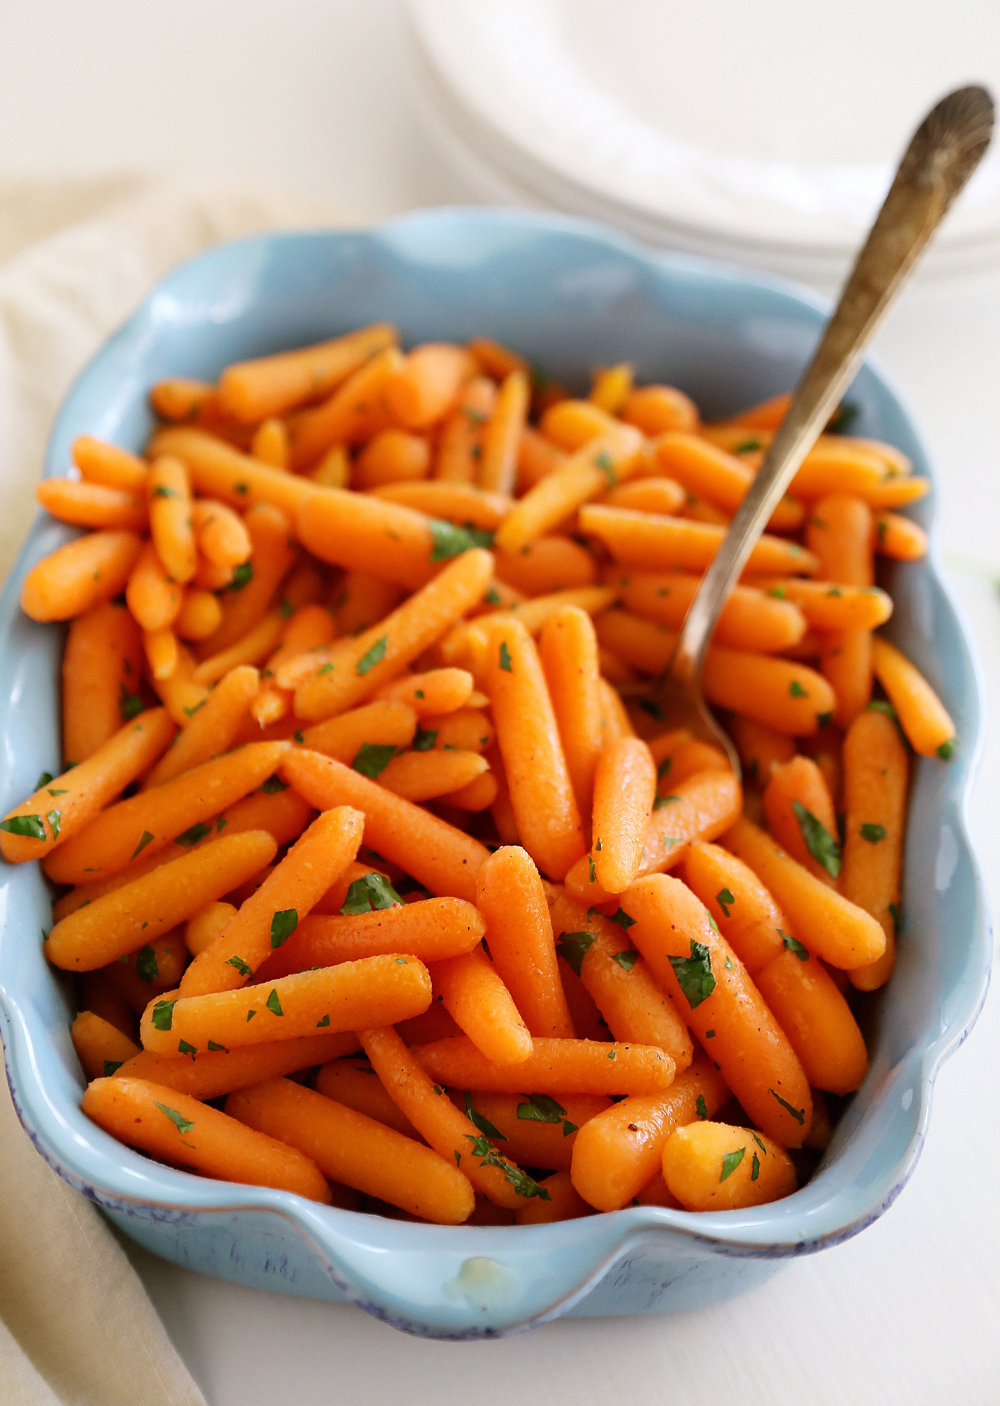 Honey-Glazed Baby Carrots – Tender crisp carrots with butter, brown sugar and nutmeg make a perfect one-skillet side! | thecomfortofcooking.com